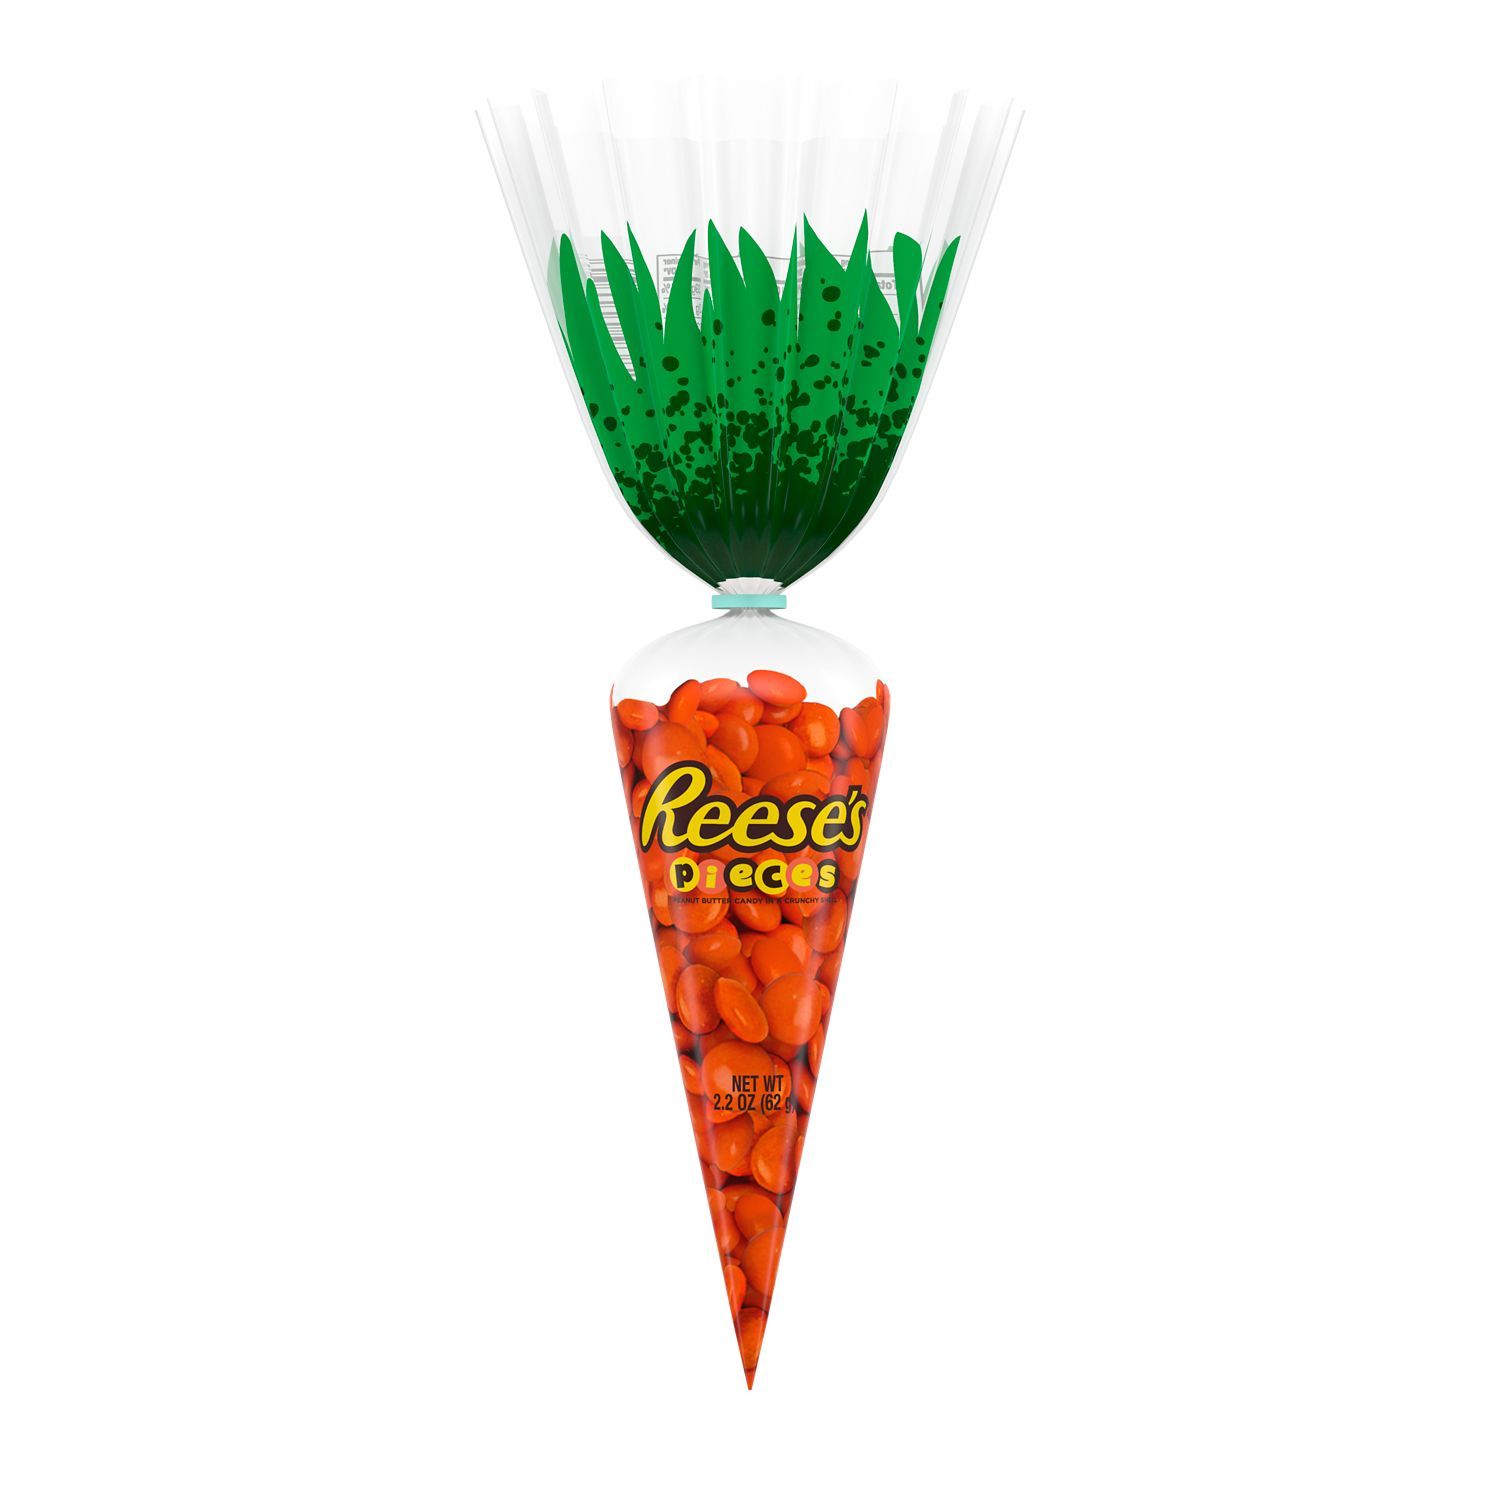 REESE'S, PIECES Peanut Butter Candy, Easter, 2.2 oz, Carrot Shaped Bag | Walmart (US)